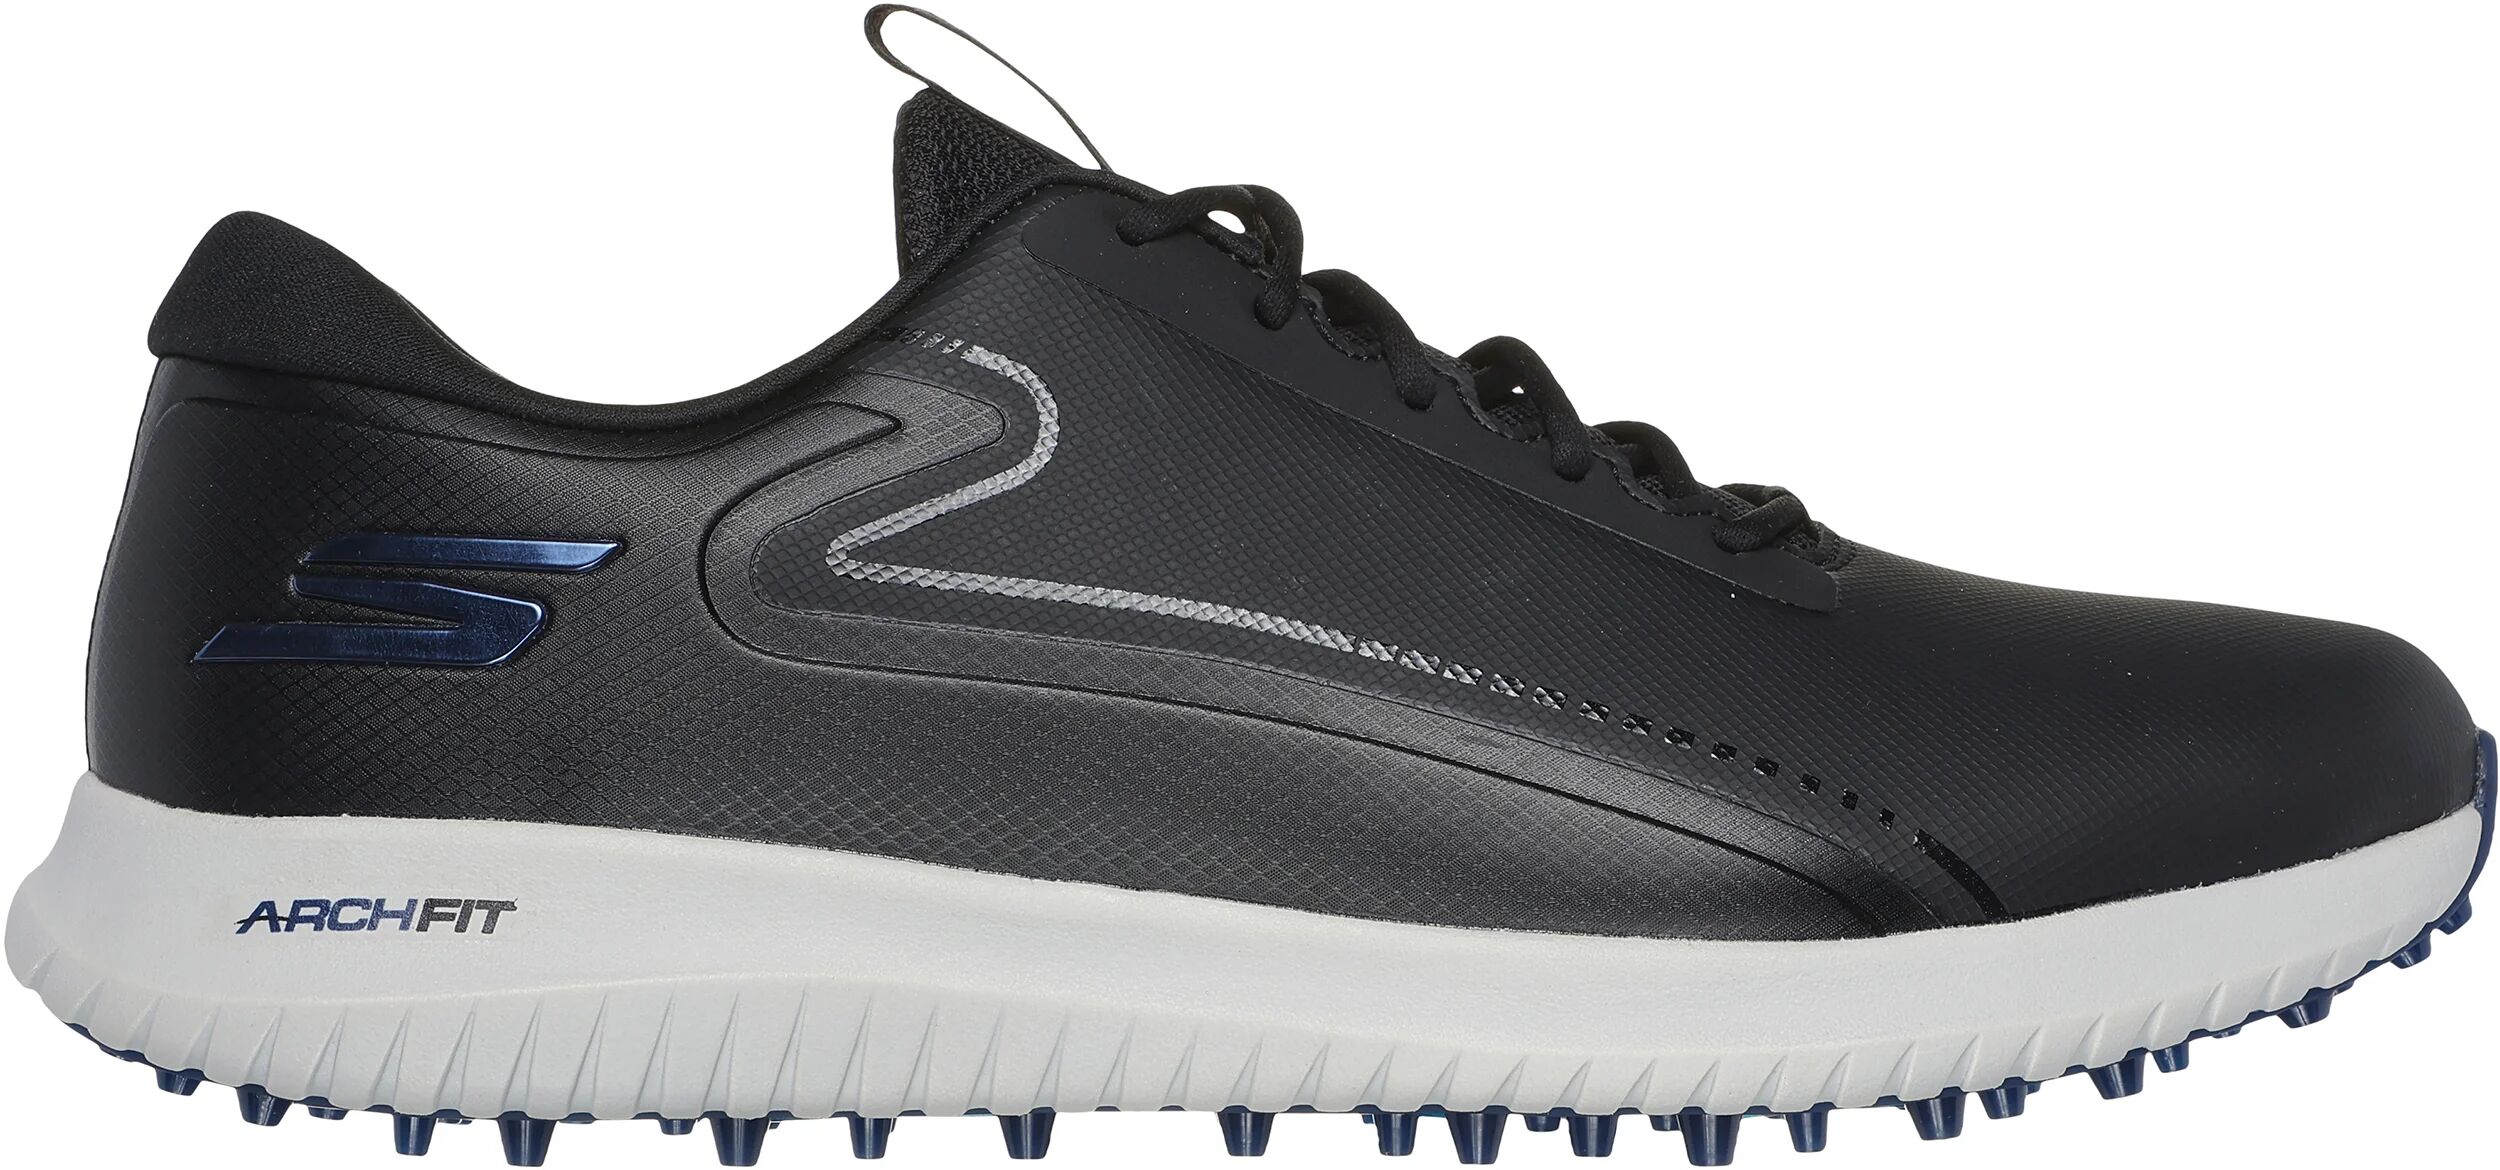 Skechers GO GOLF Max 3 Golf Shoes - Black/Gray - 8 - WIDE